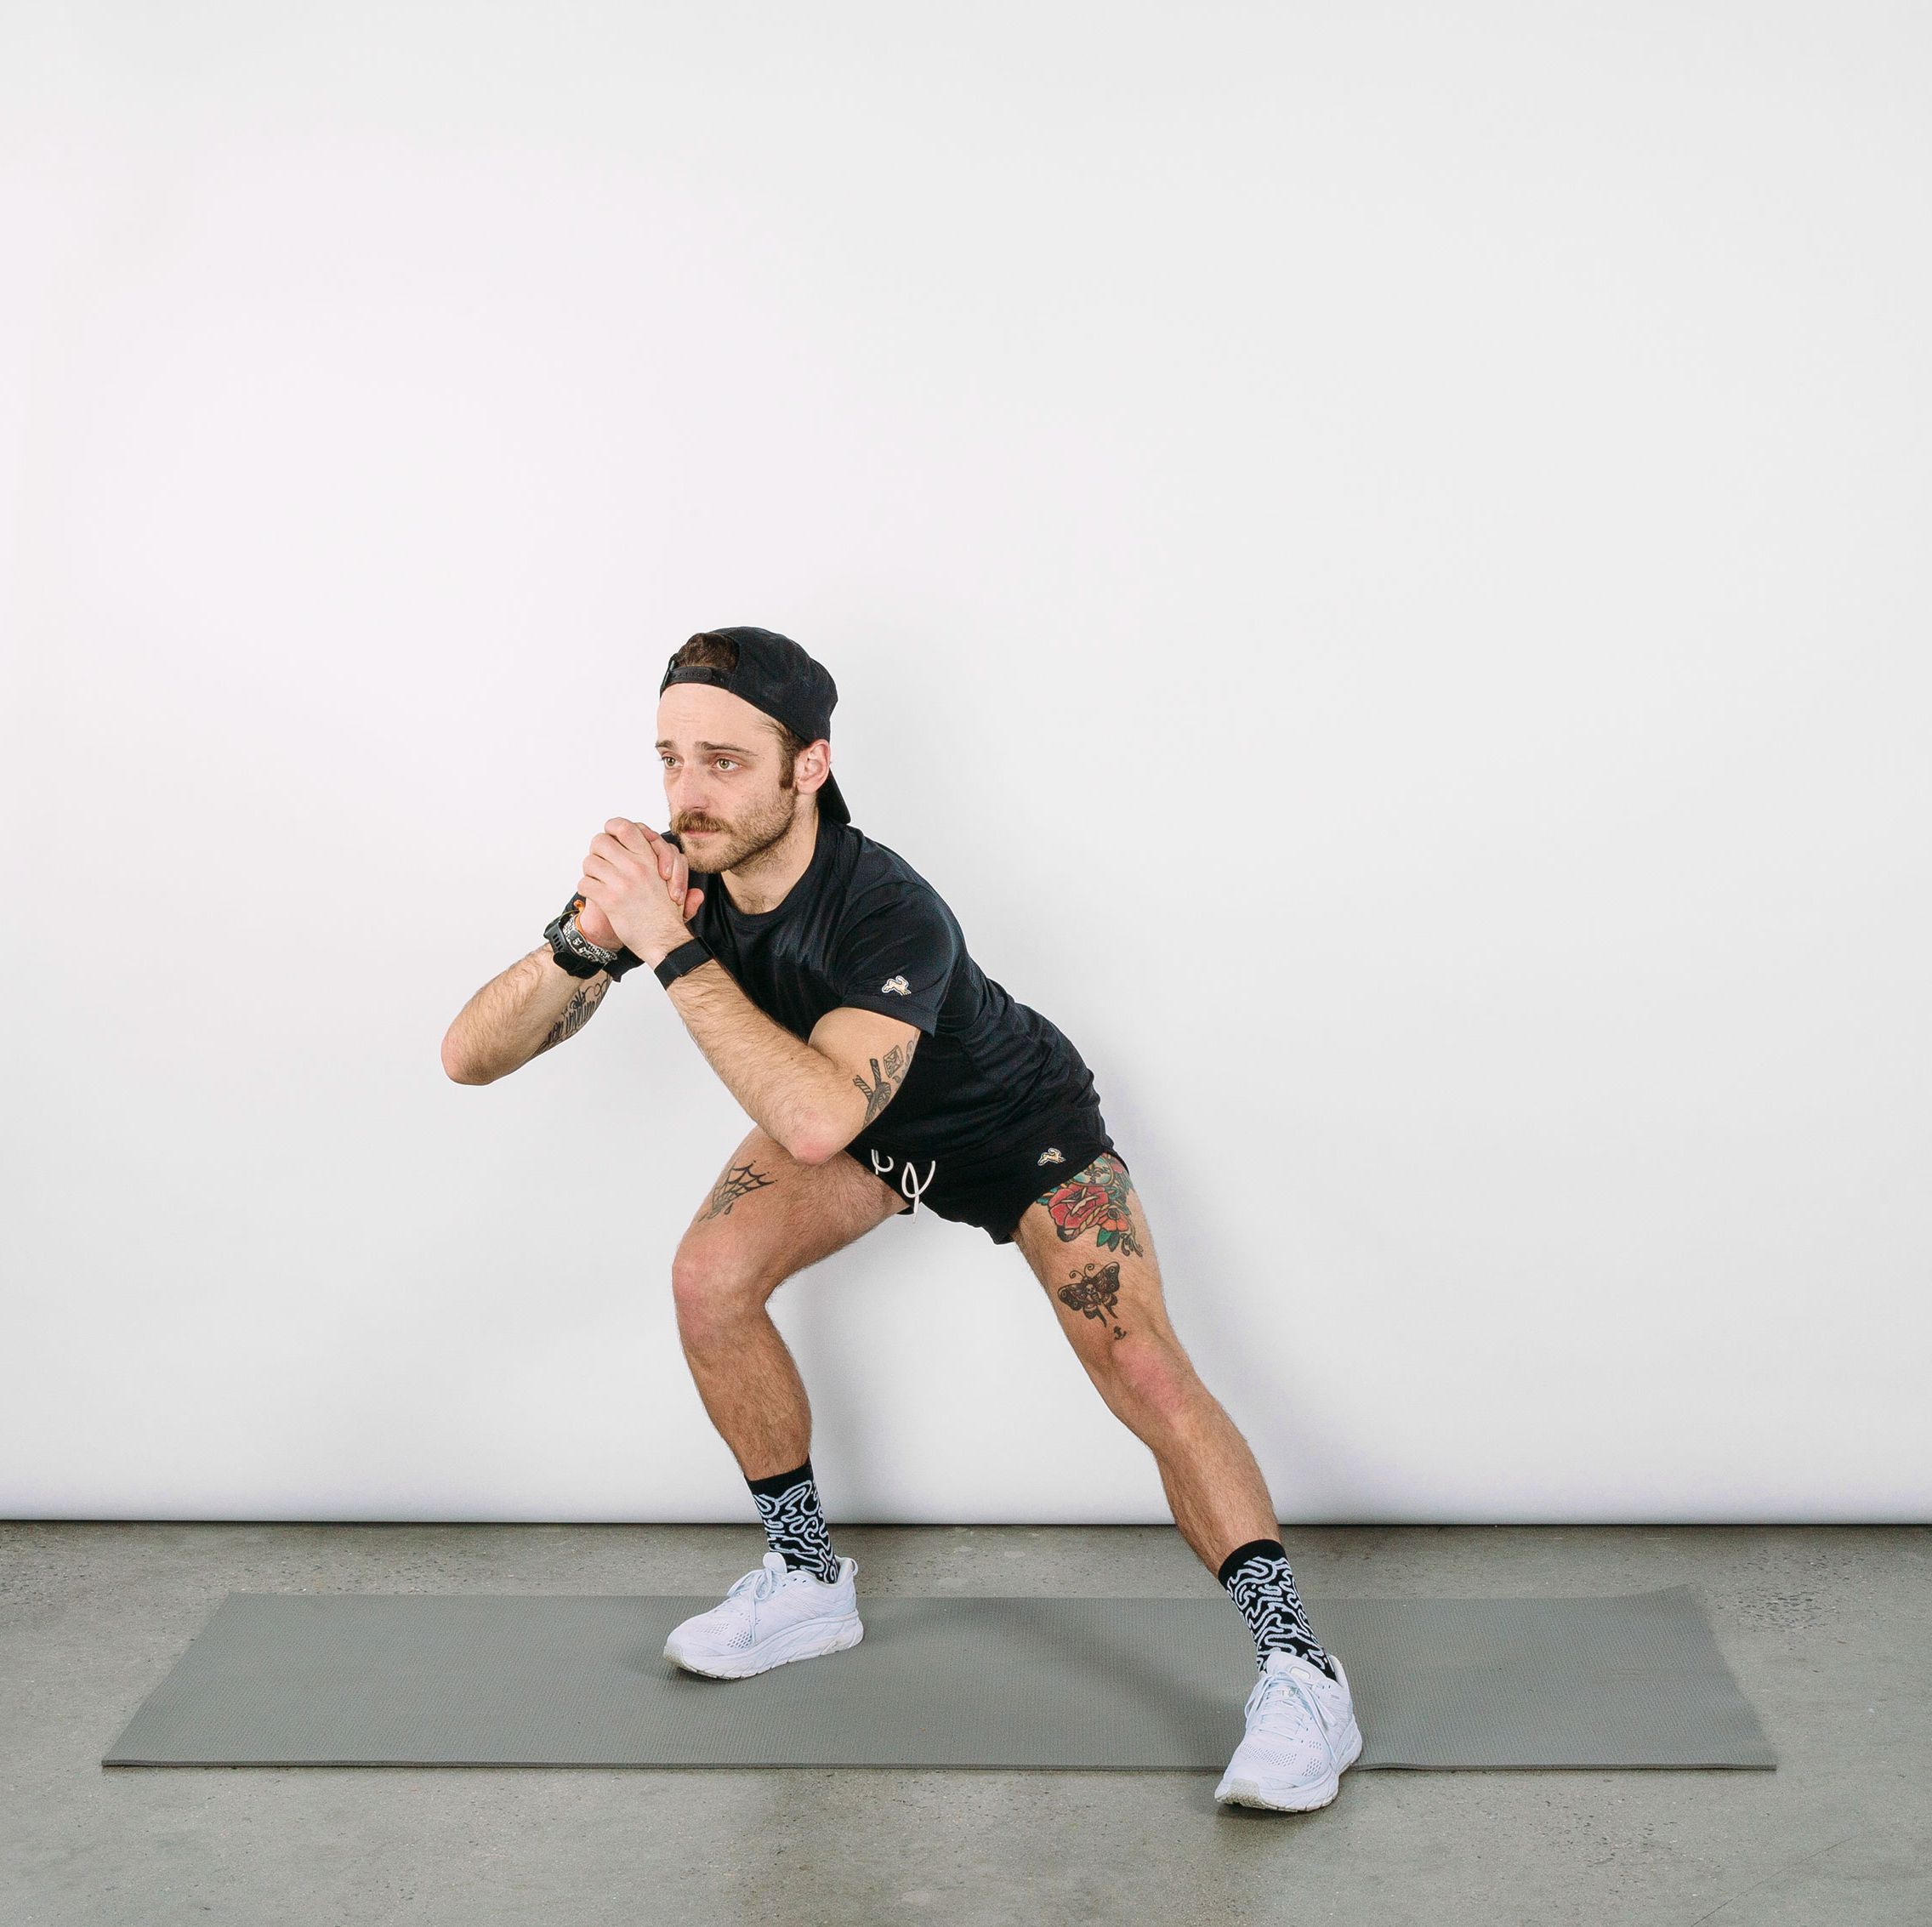 what do lateral lunges do